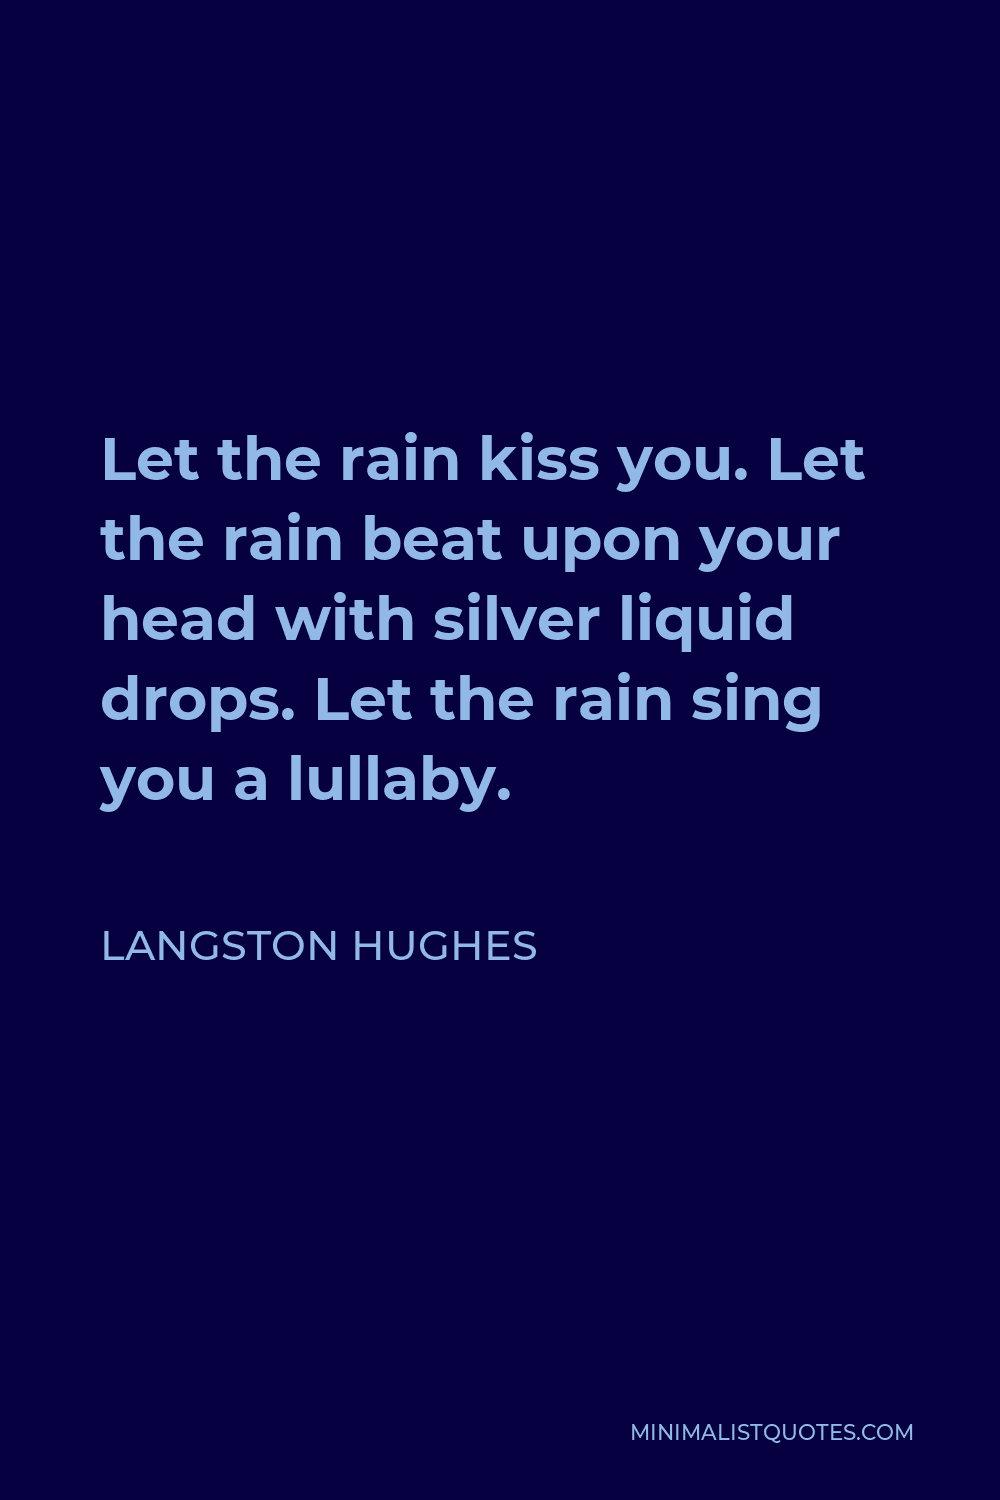 Langston Hughes Quote - Let the rain kiss you. Let the rain beat upon your head with silver liquid drops. Let the rain sing you a lullaby.